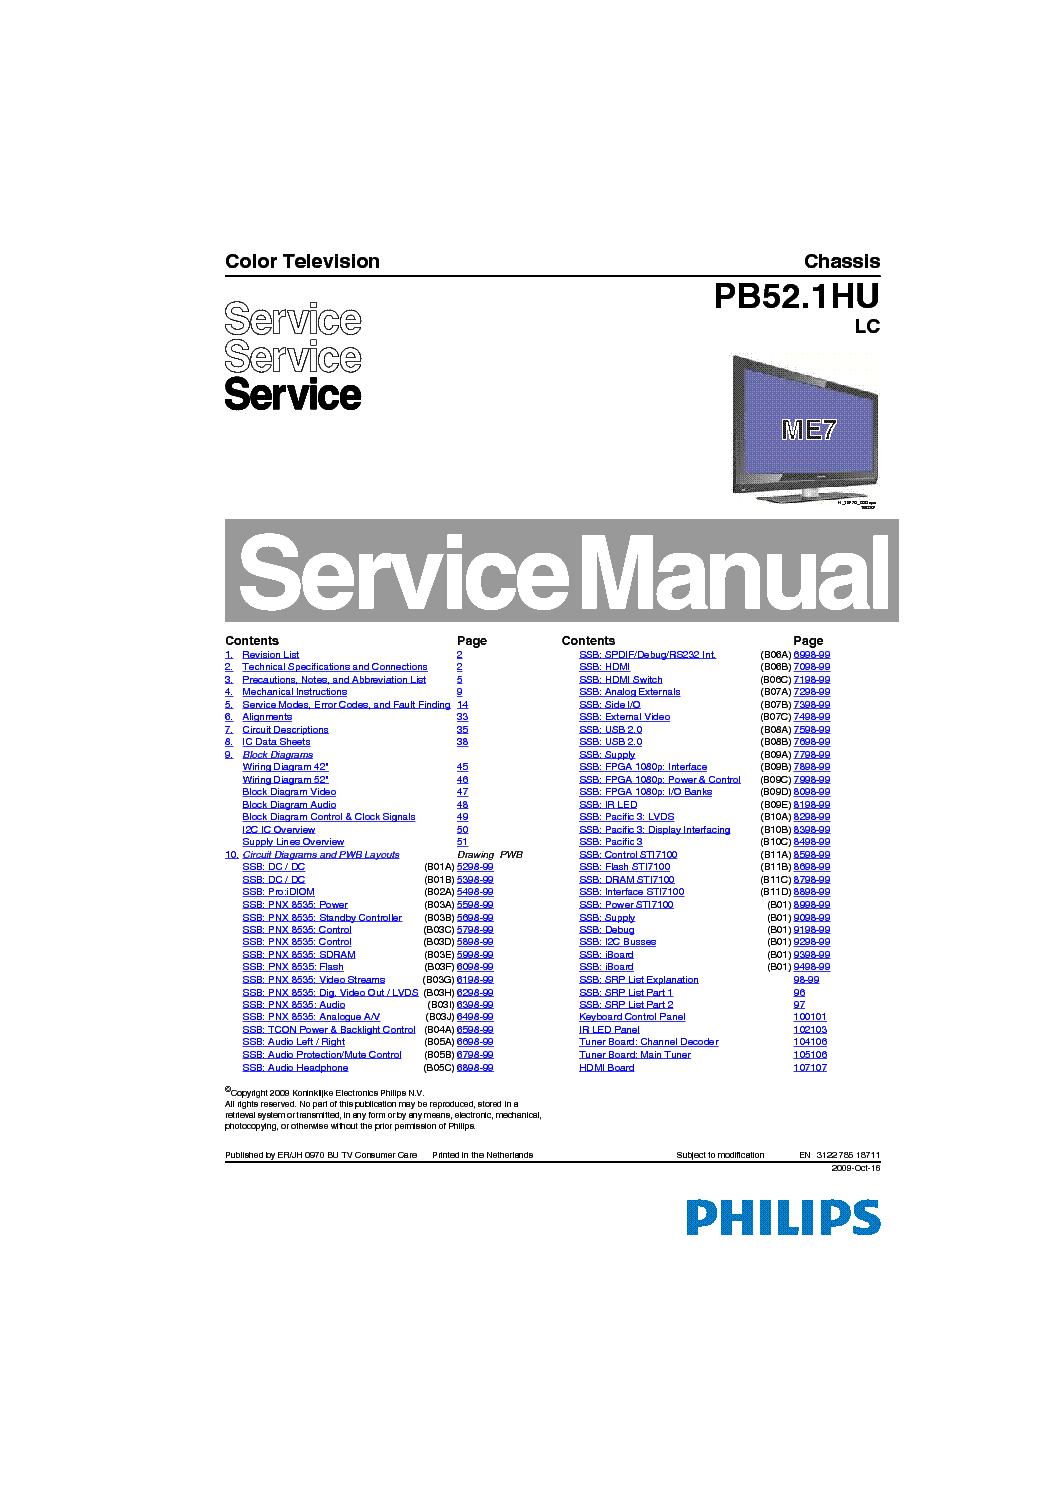 PHILIPS PB52.1HU LC CHASSIS LCD TV SM service manual (1st page)